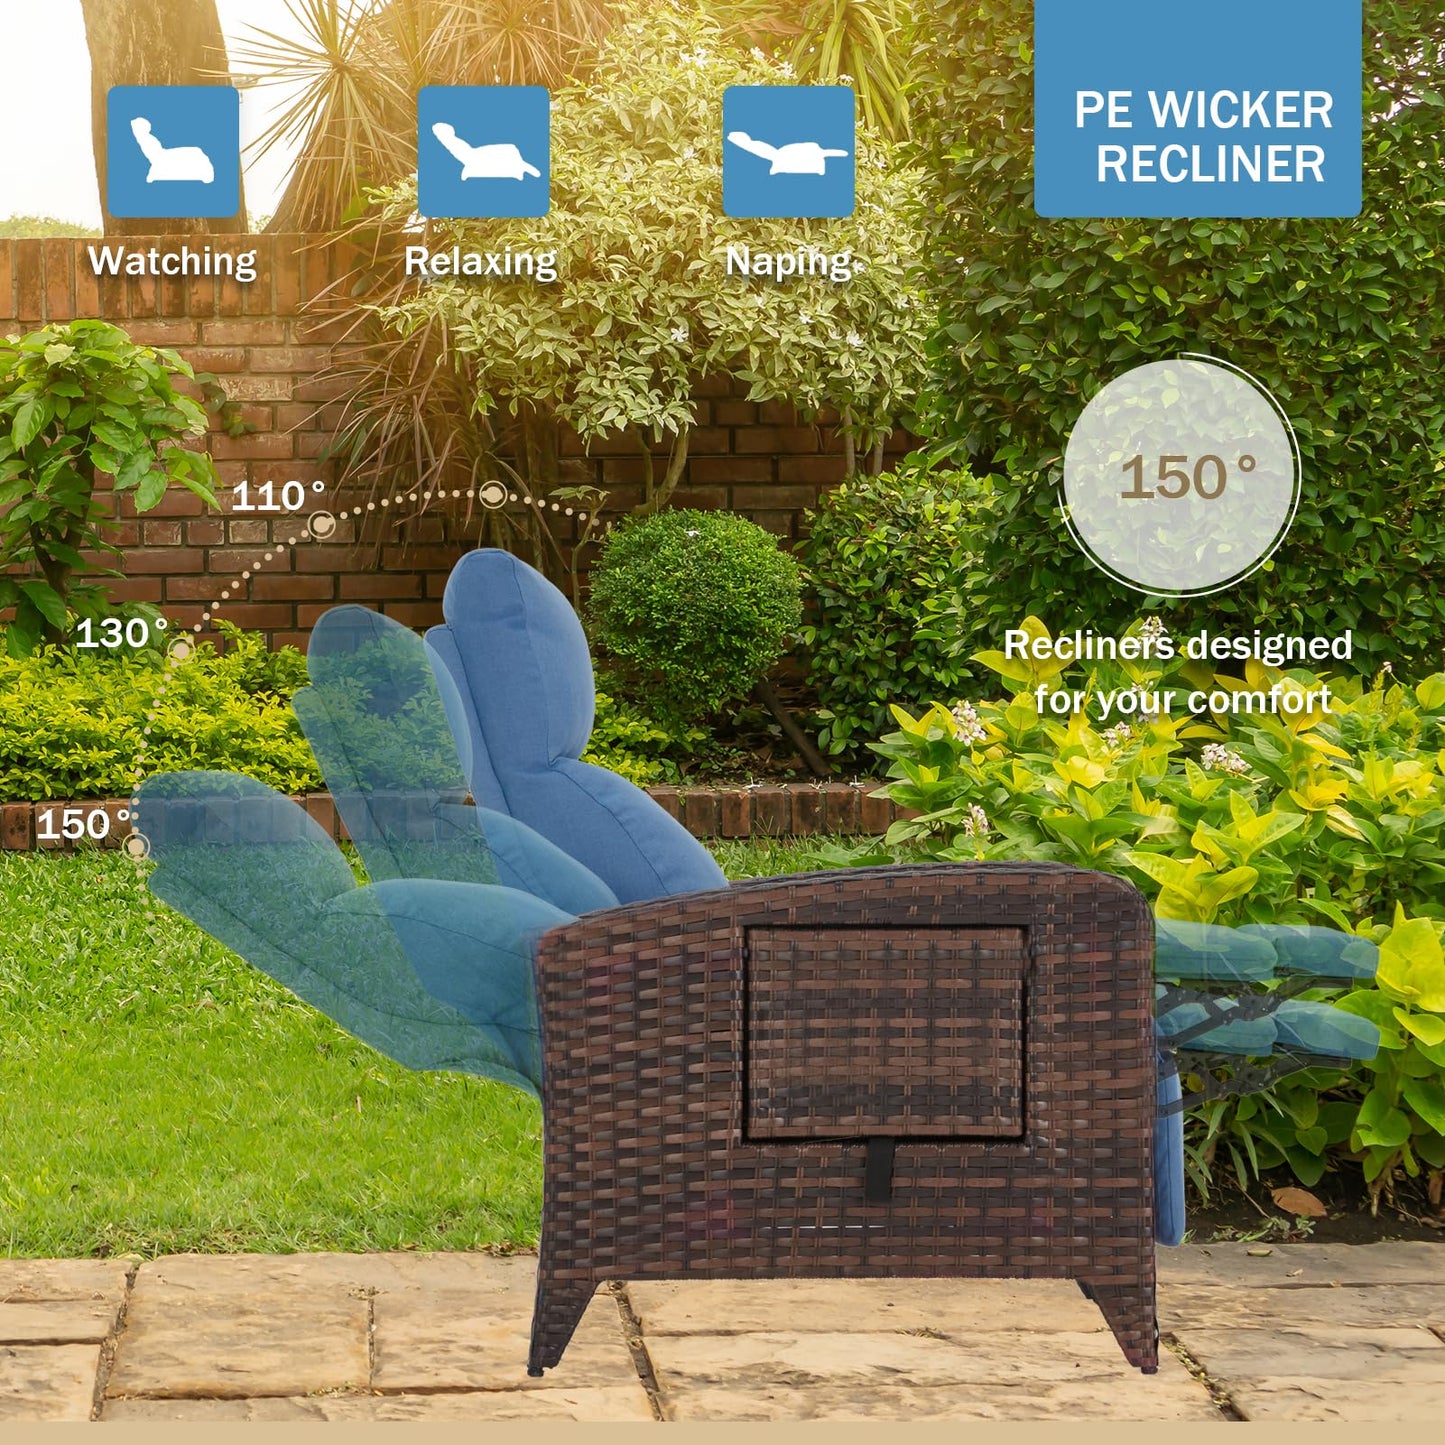 ZZW Outdoor Recliner Chairs Set of 2, Reclining Patio Chairs with Adjustable Back up to 150°Lay Flat and Extended Footrest, Wicker Recliner Chairs with Flip Table and Removable Olefin Cushion